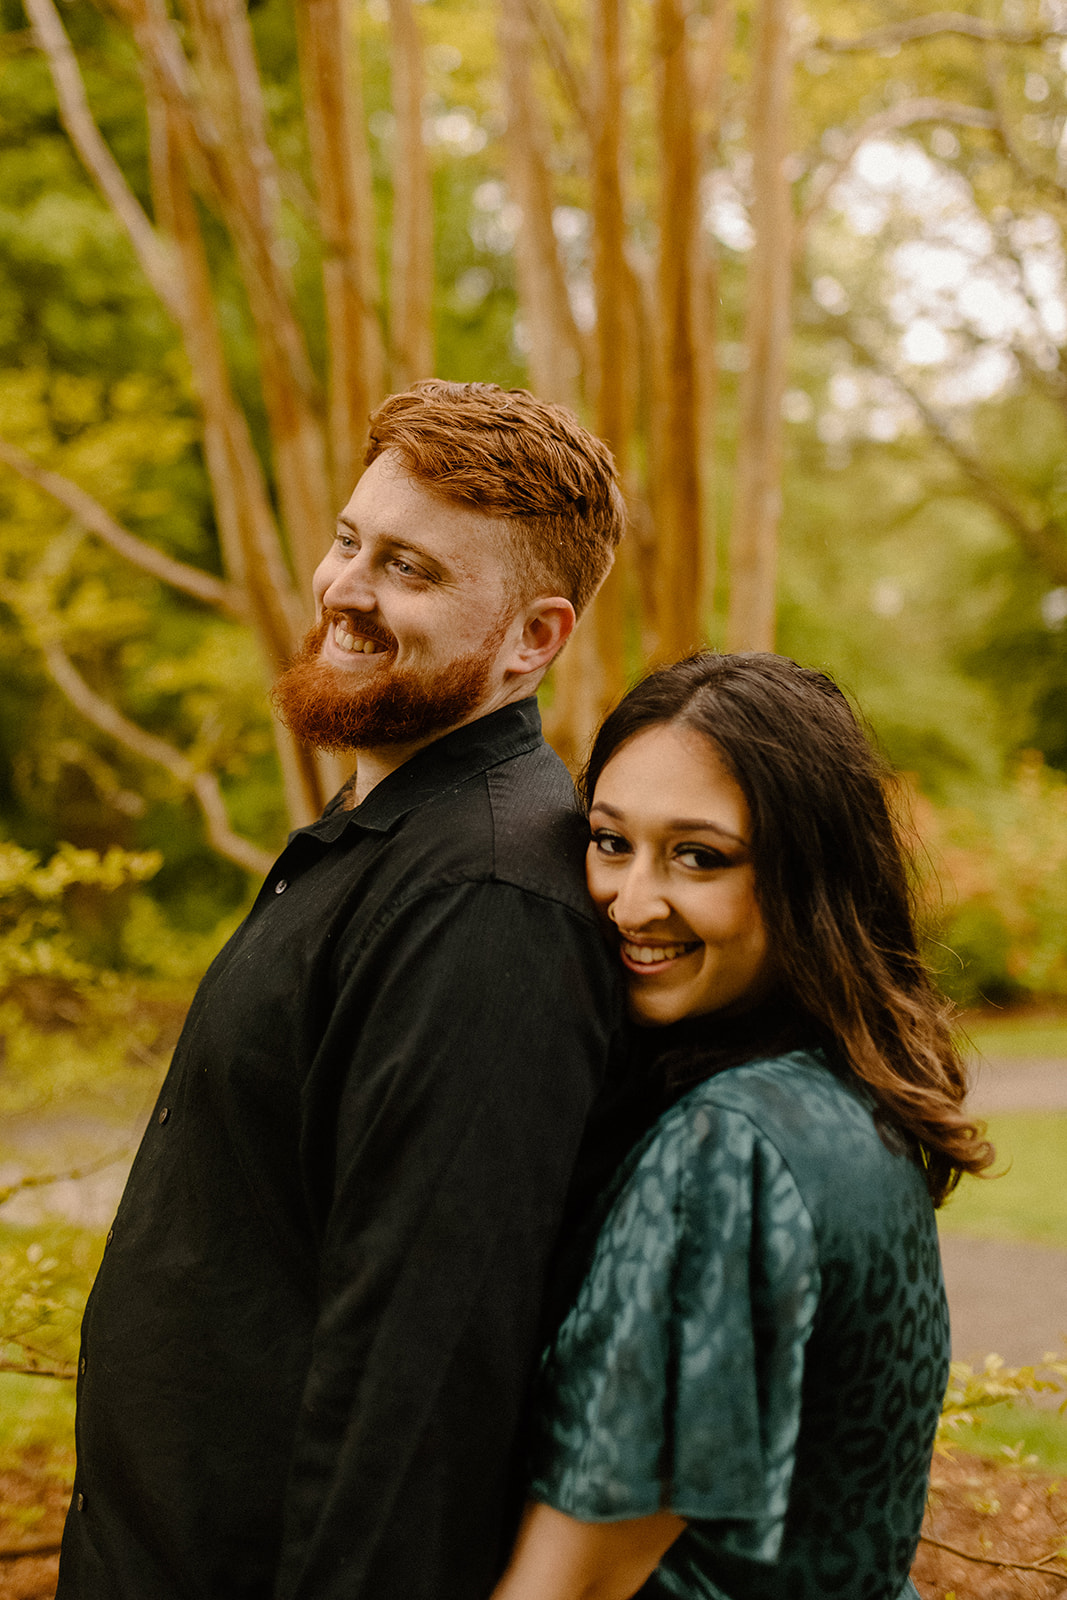 Dreamy Seattle Engagement Photo locations